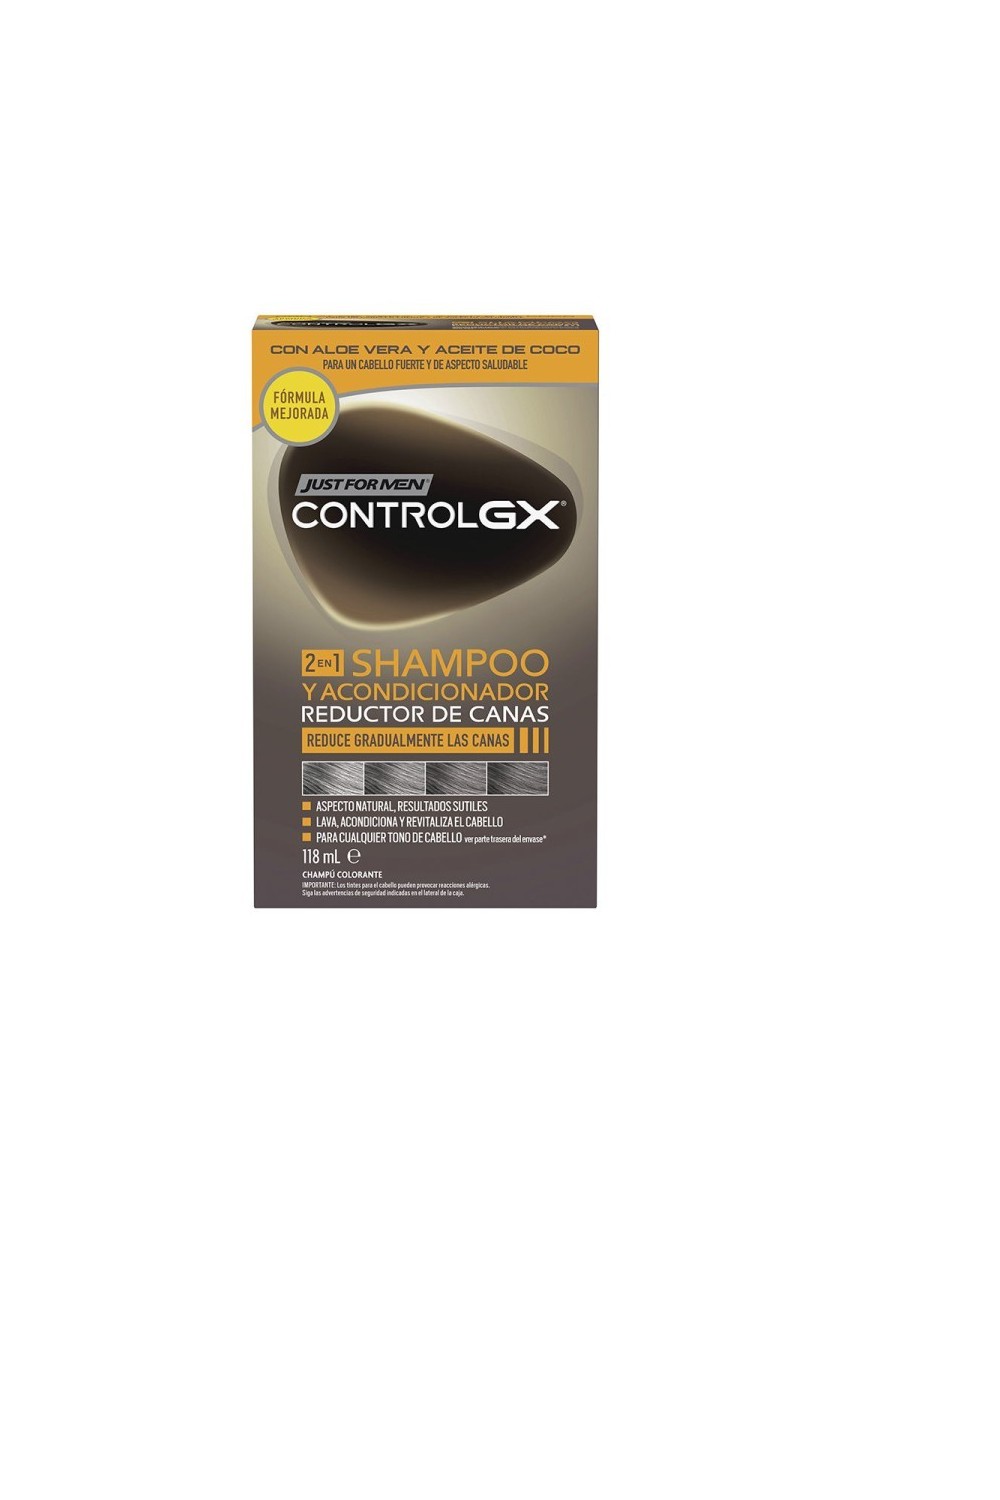 Just for Men Control Gx Grey Hair Reducing Shampoo & Conditioner 118ml